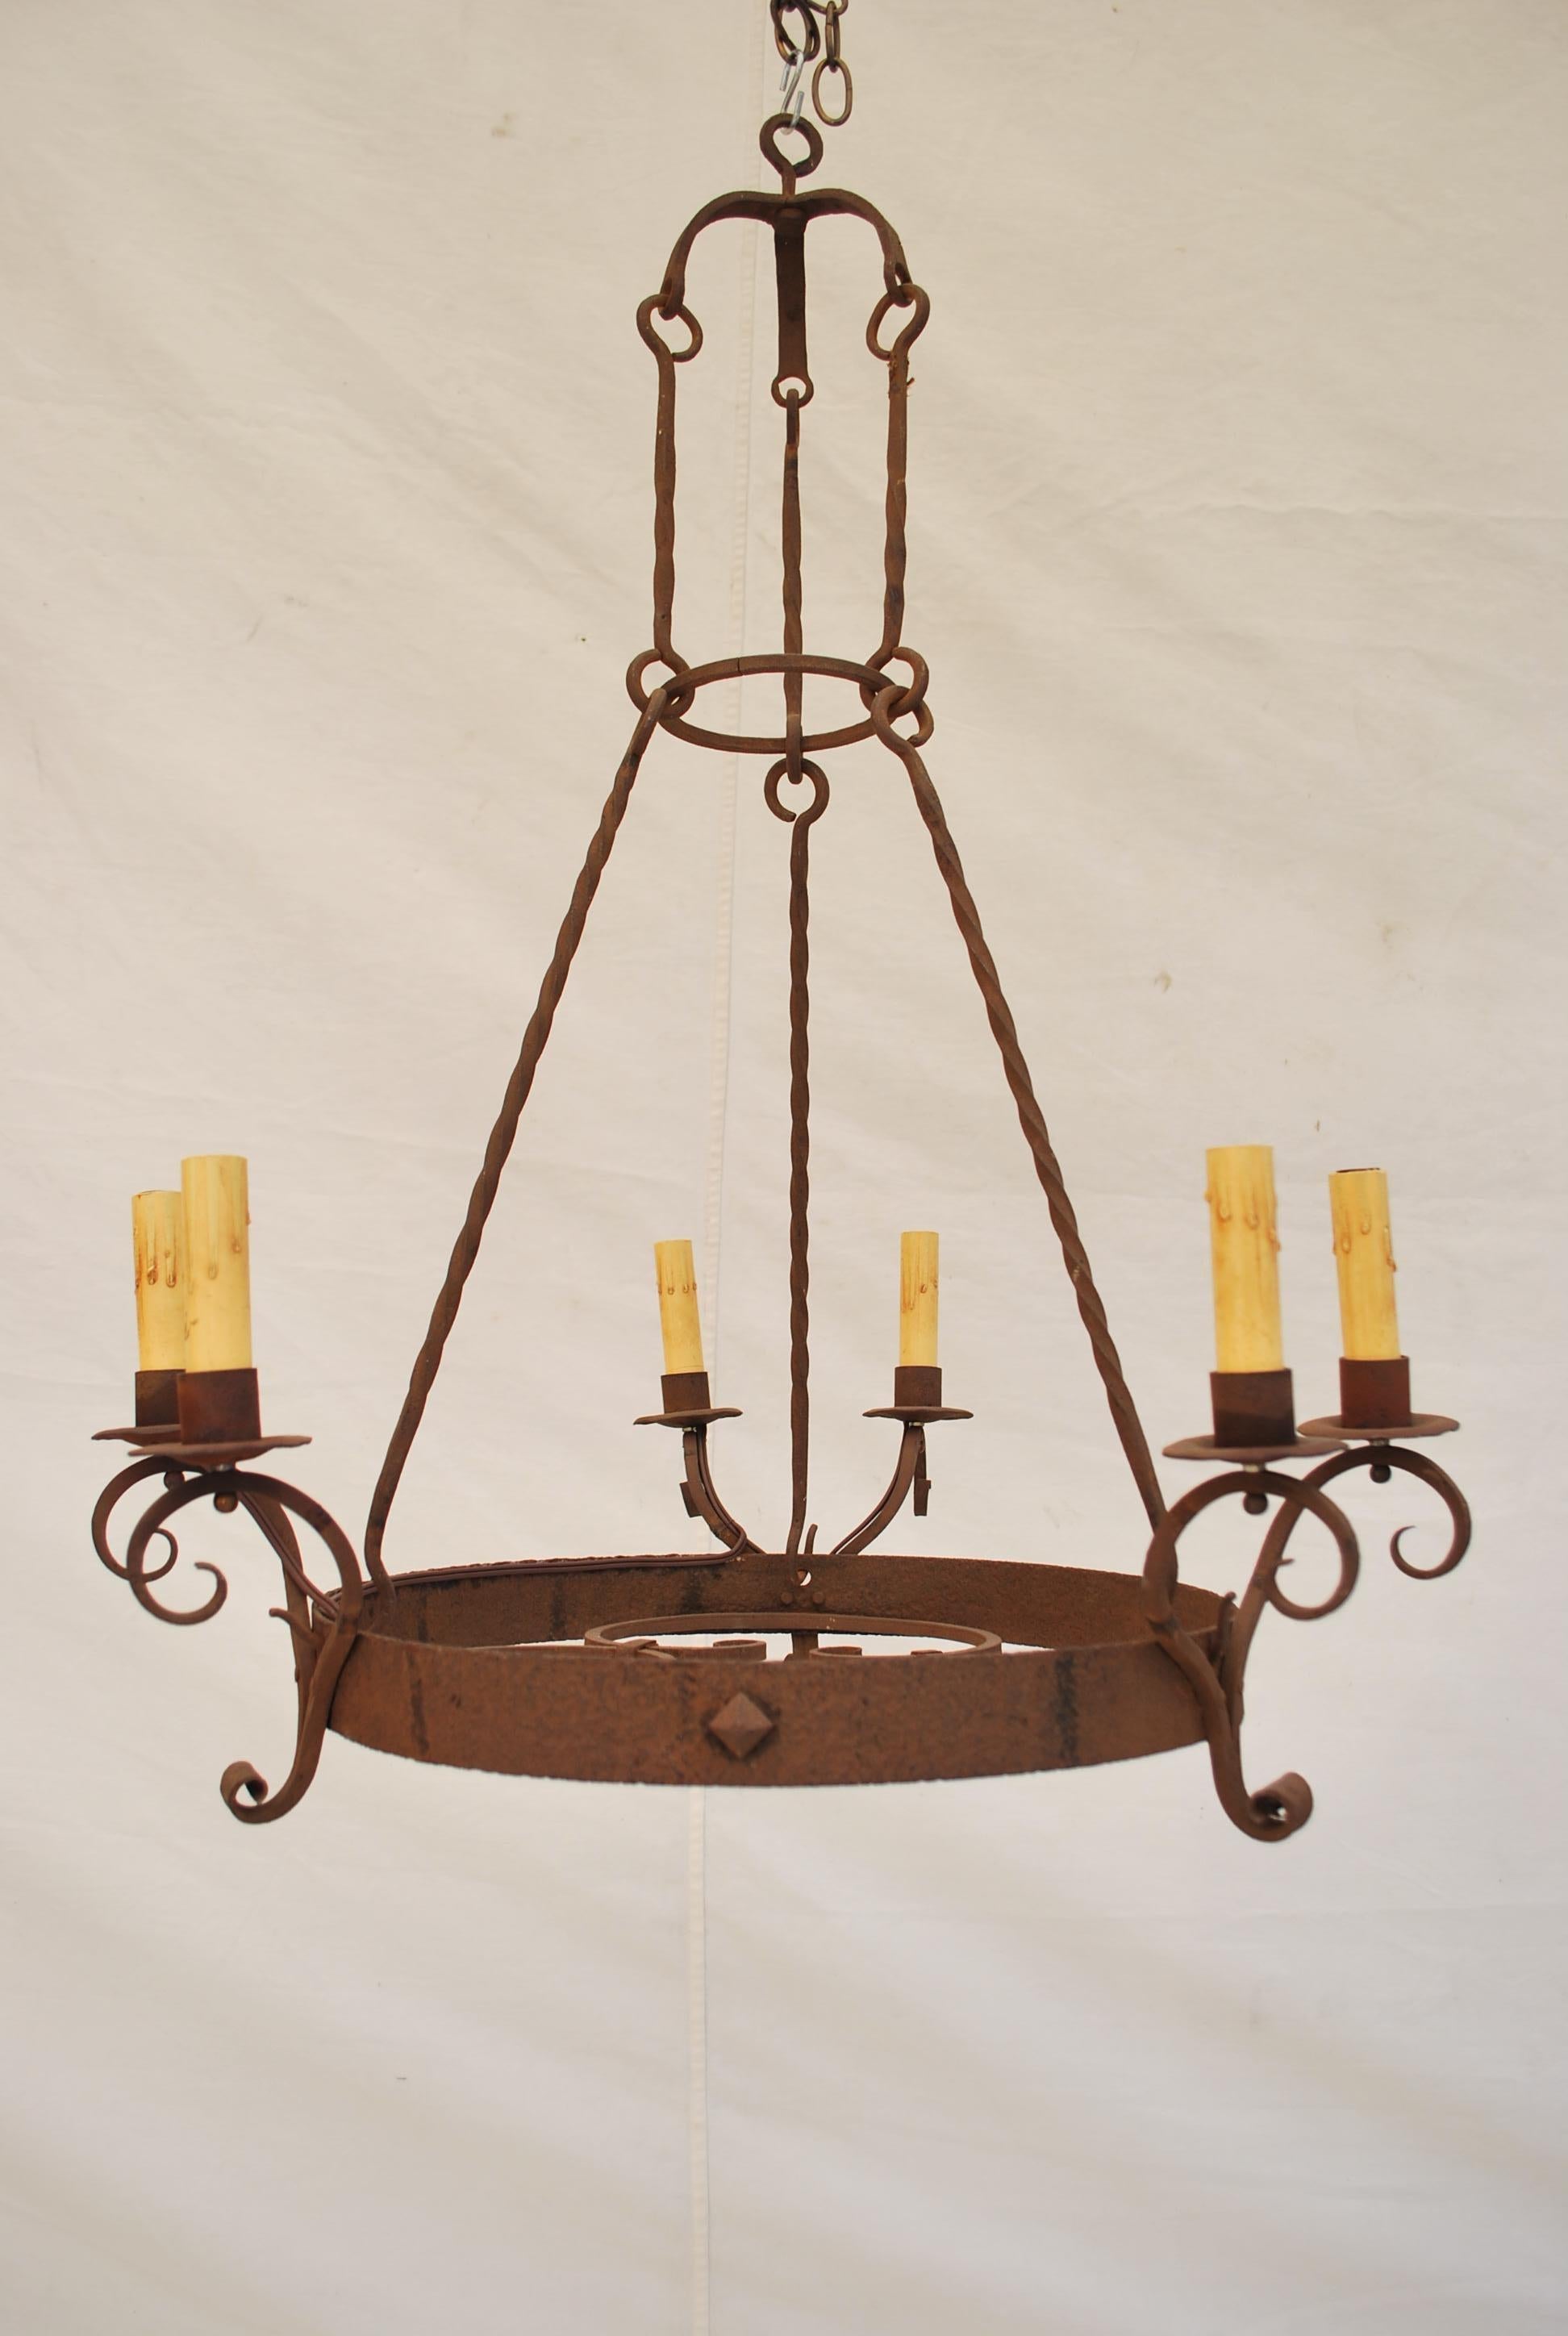 An elegant French 1920's all hands made wrought iron chandelier, the patina is so nicer in person